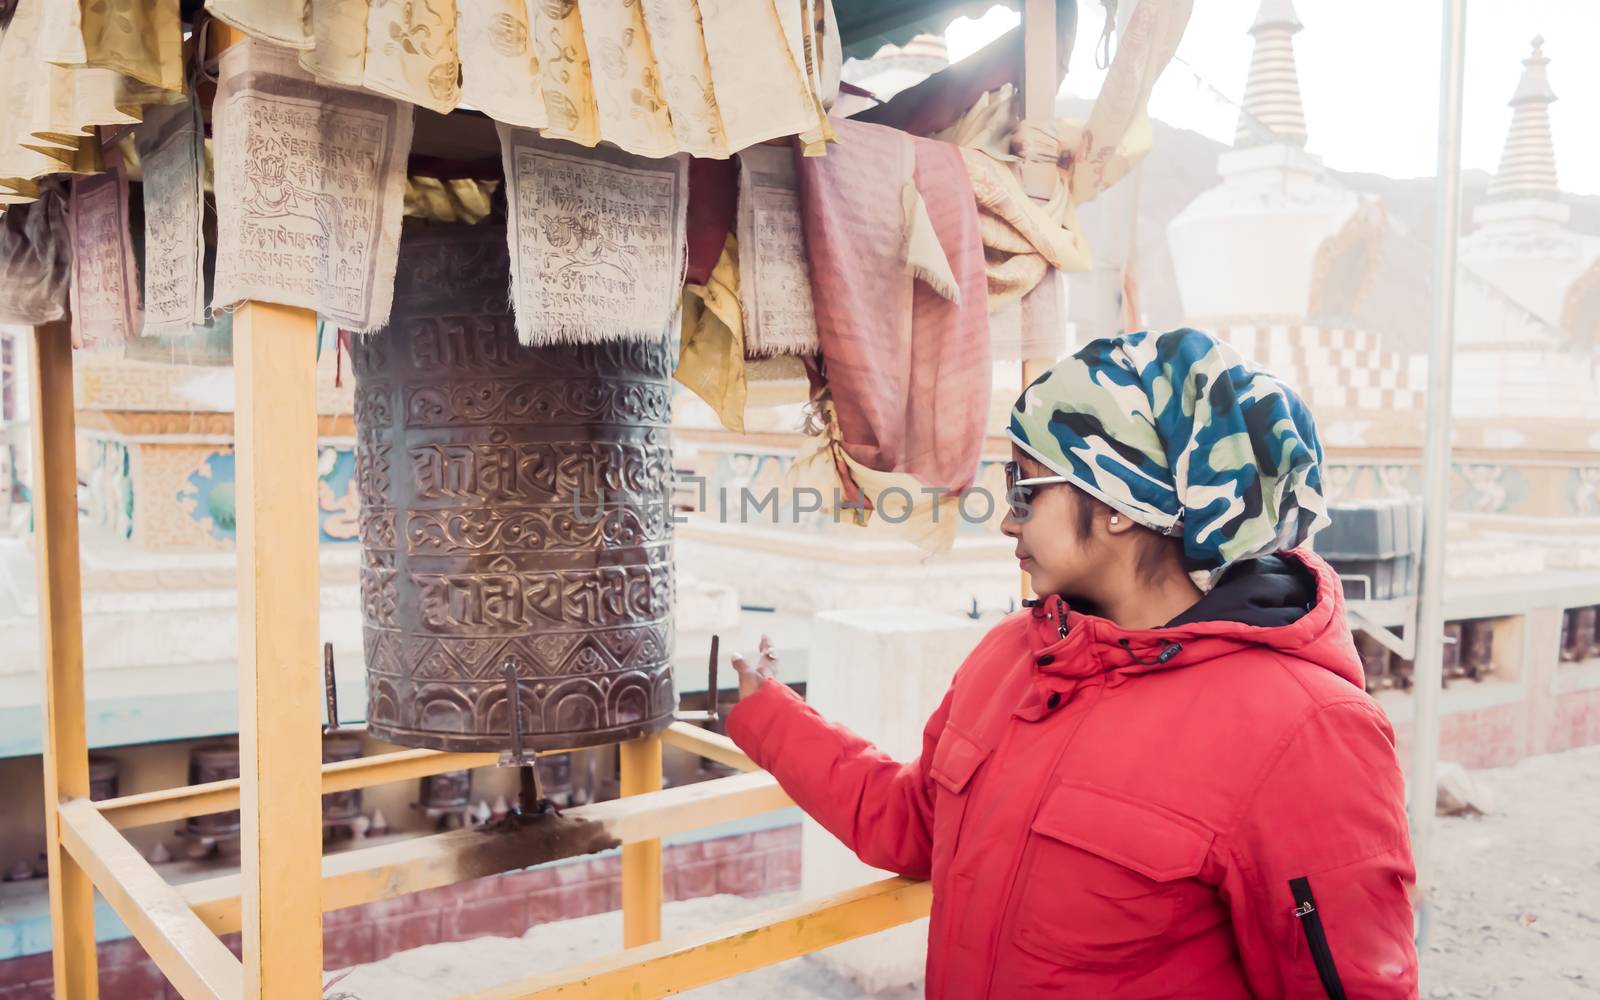 A solo traveler Indian woman in warm clothing turning Buddhist prayer wheel drum of a Buddhist monastery. Travel Holiday vacation background. Kaza, Himachal Pradesh, India, South Asia May 2019 by sudiptabhowmick